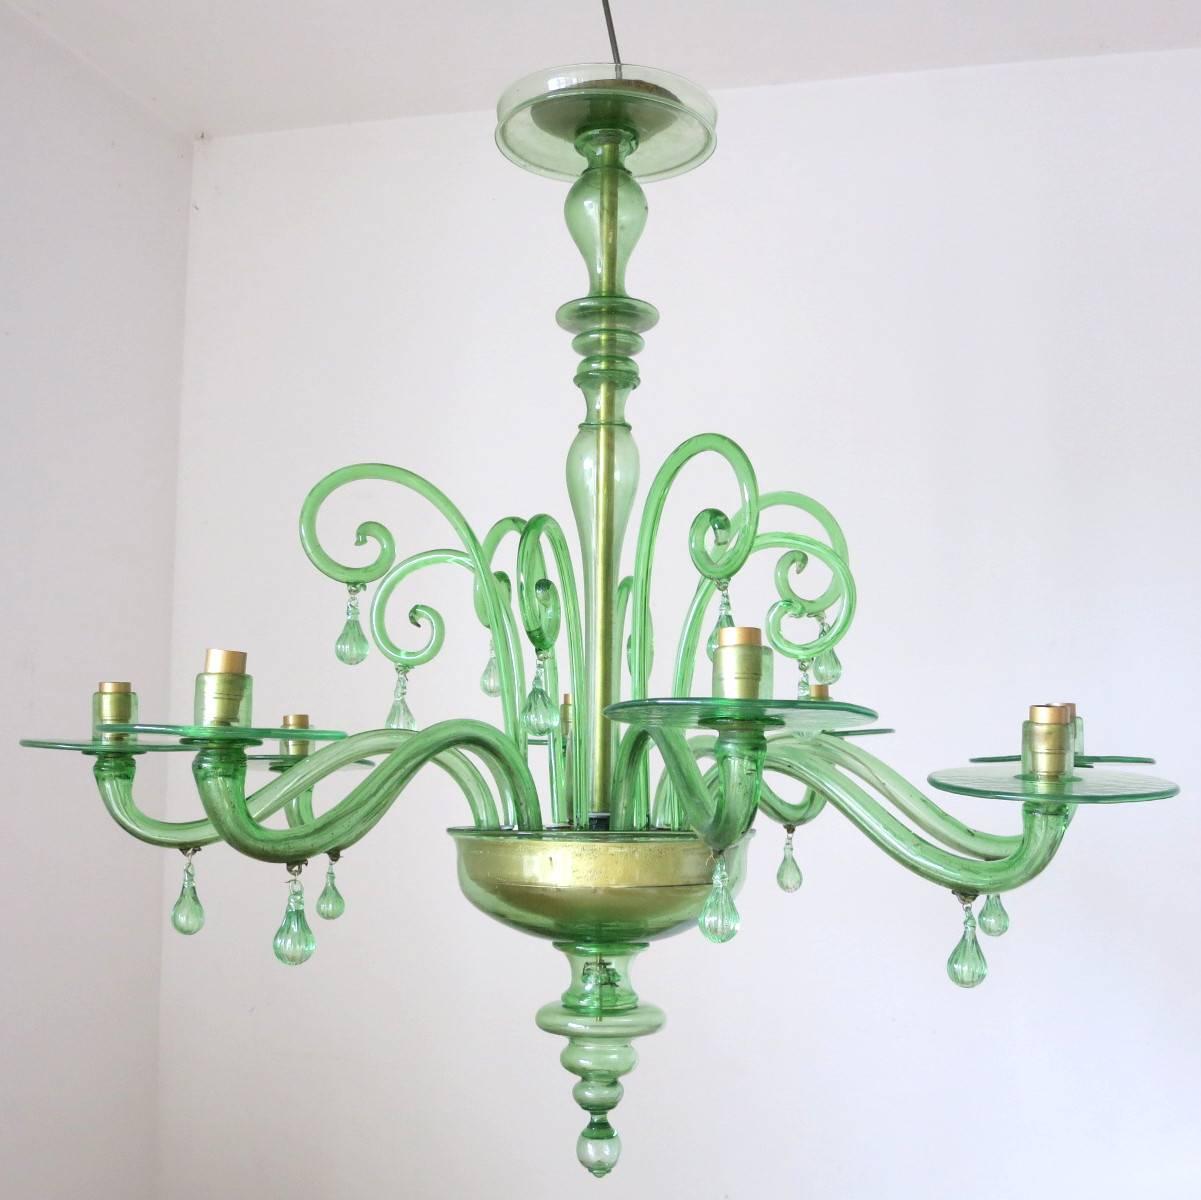 This emerald green Murano glass chandelier was mouth blown in the 1930s by skilled glass Maestros for Venini.

Originally made for burning candles, it has been newly rewired with eight candelabra light sockets (E12 type, max 60 W each).

It's in